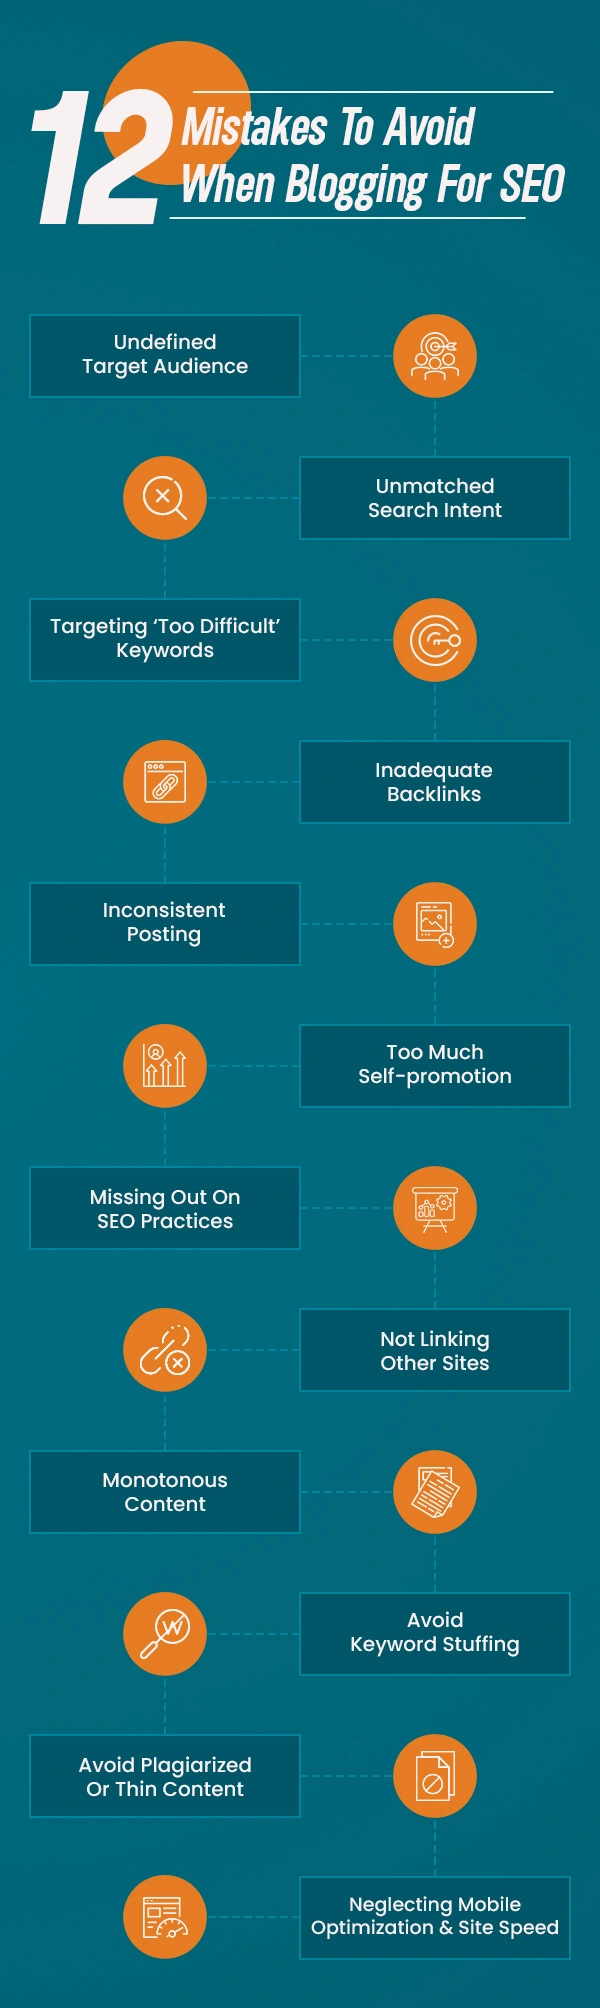 12-Mistakes-To-Avoid-When-Blogging-For-SEO